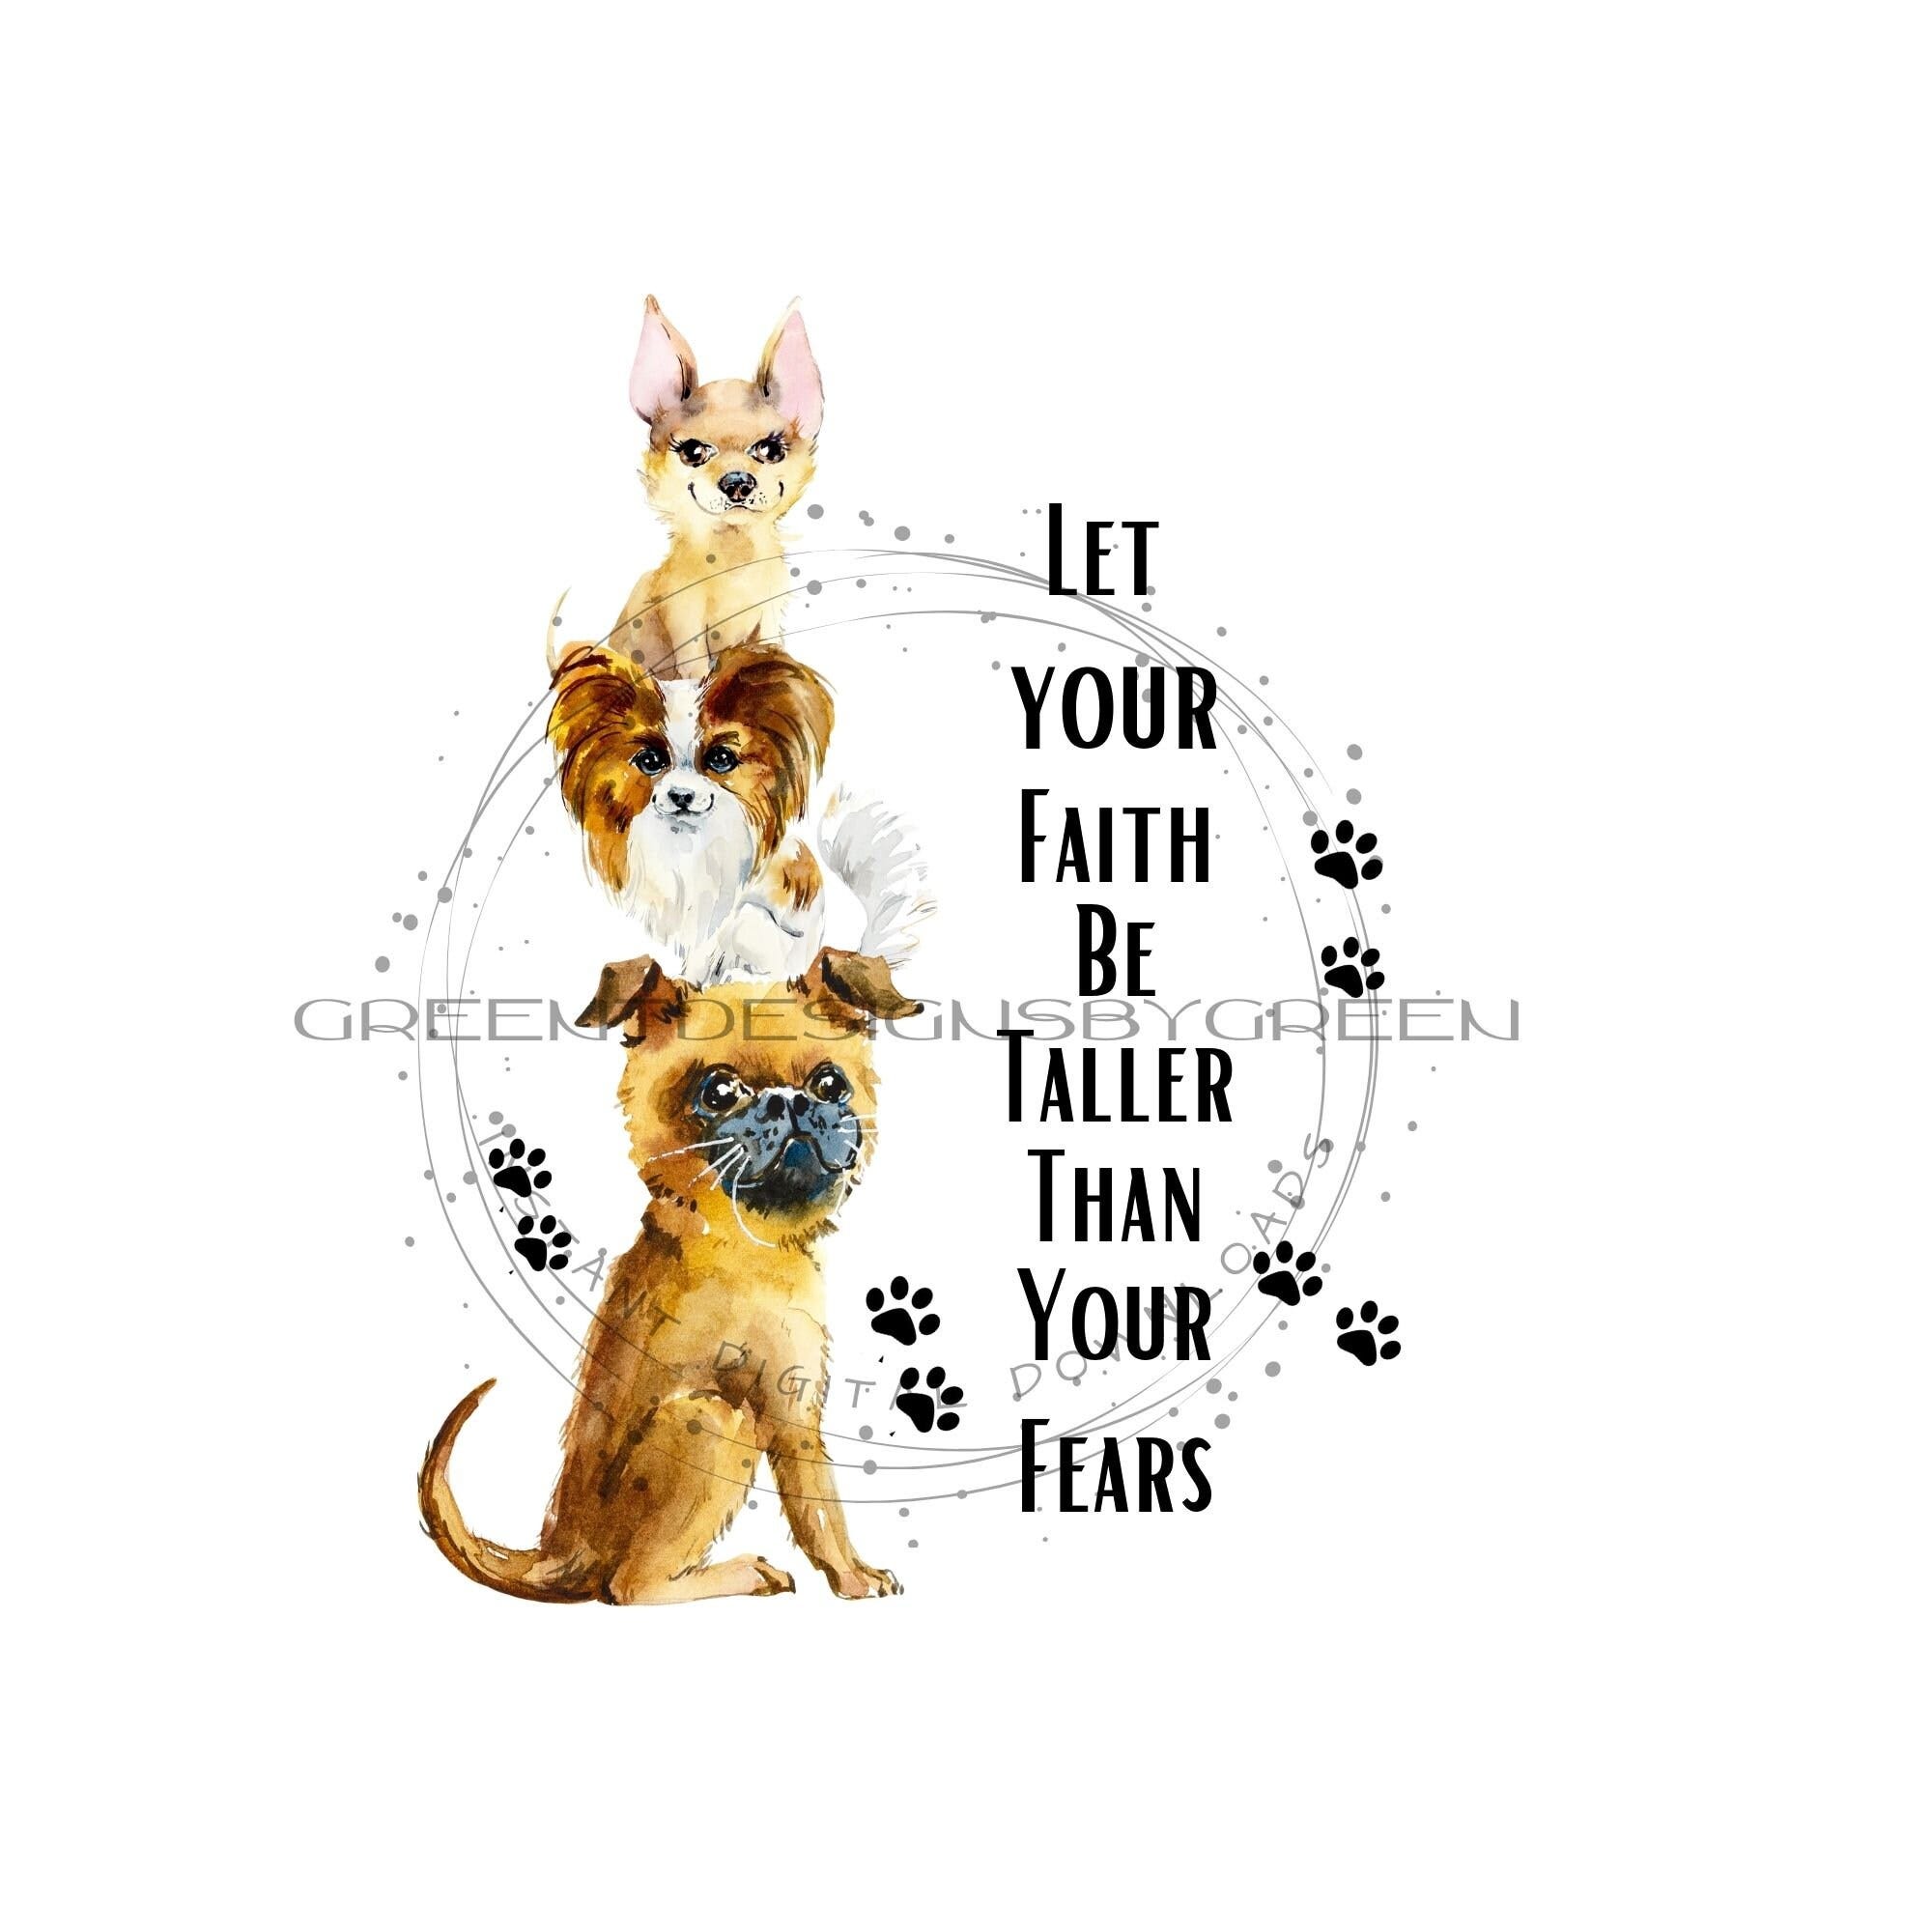 Dog PNG with a quote reading "Let your faith be stronger than your fears"  Three puppy dogs  stacked. Puppy dogs with glasses.